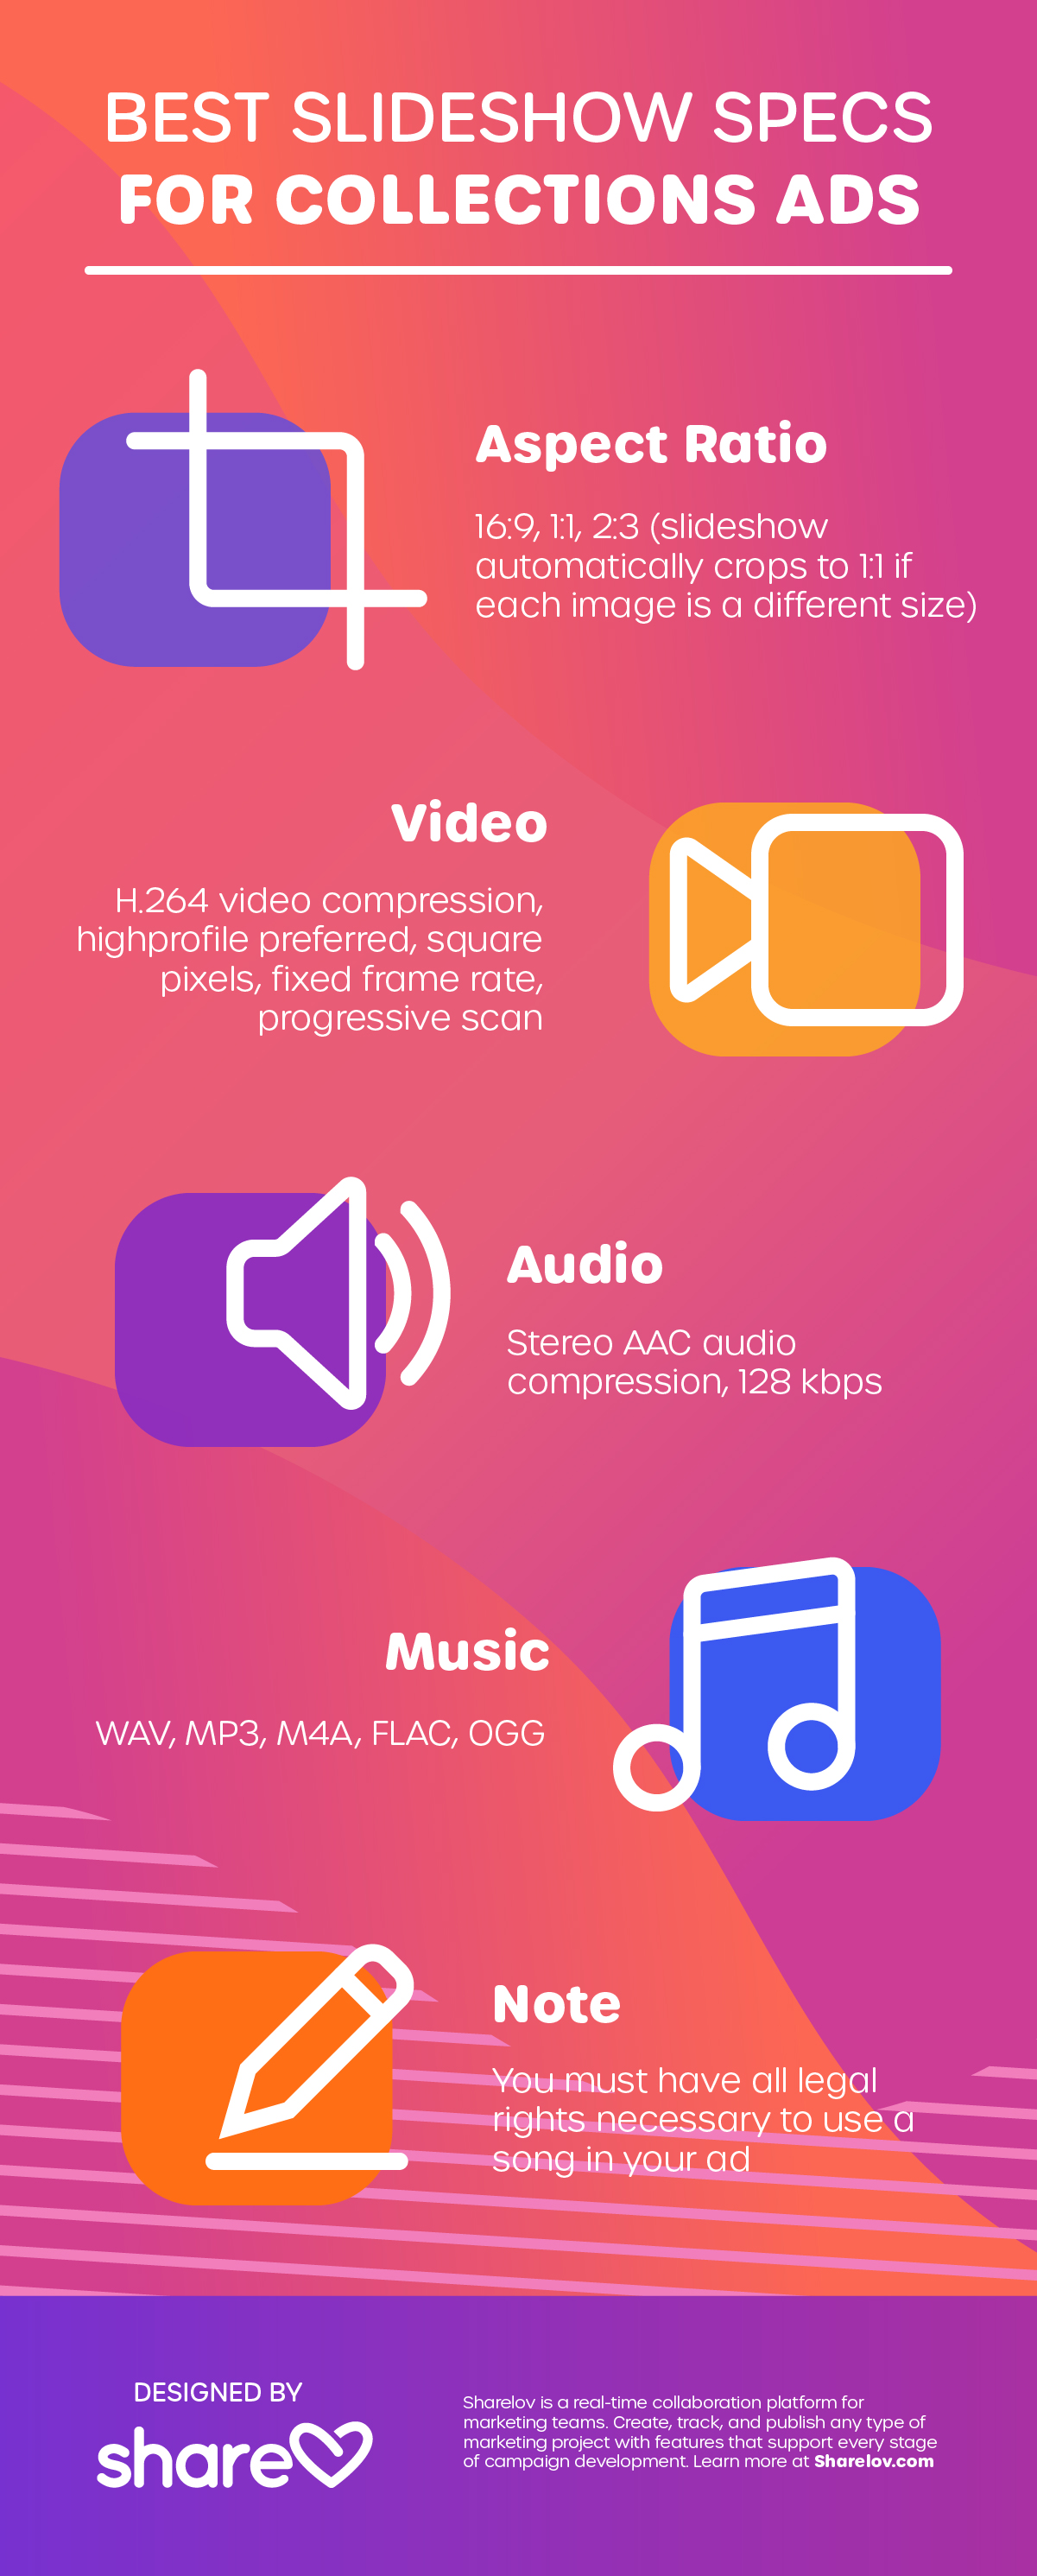 Best Slideshow Specs for Collection Ads infographic